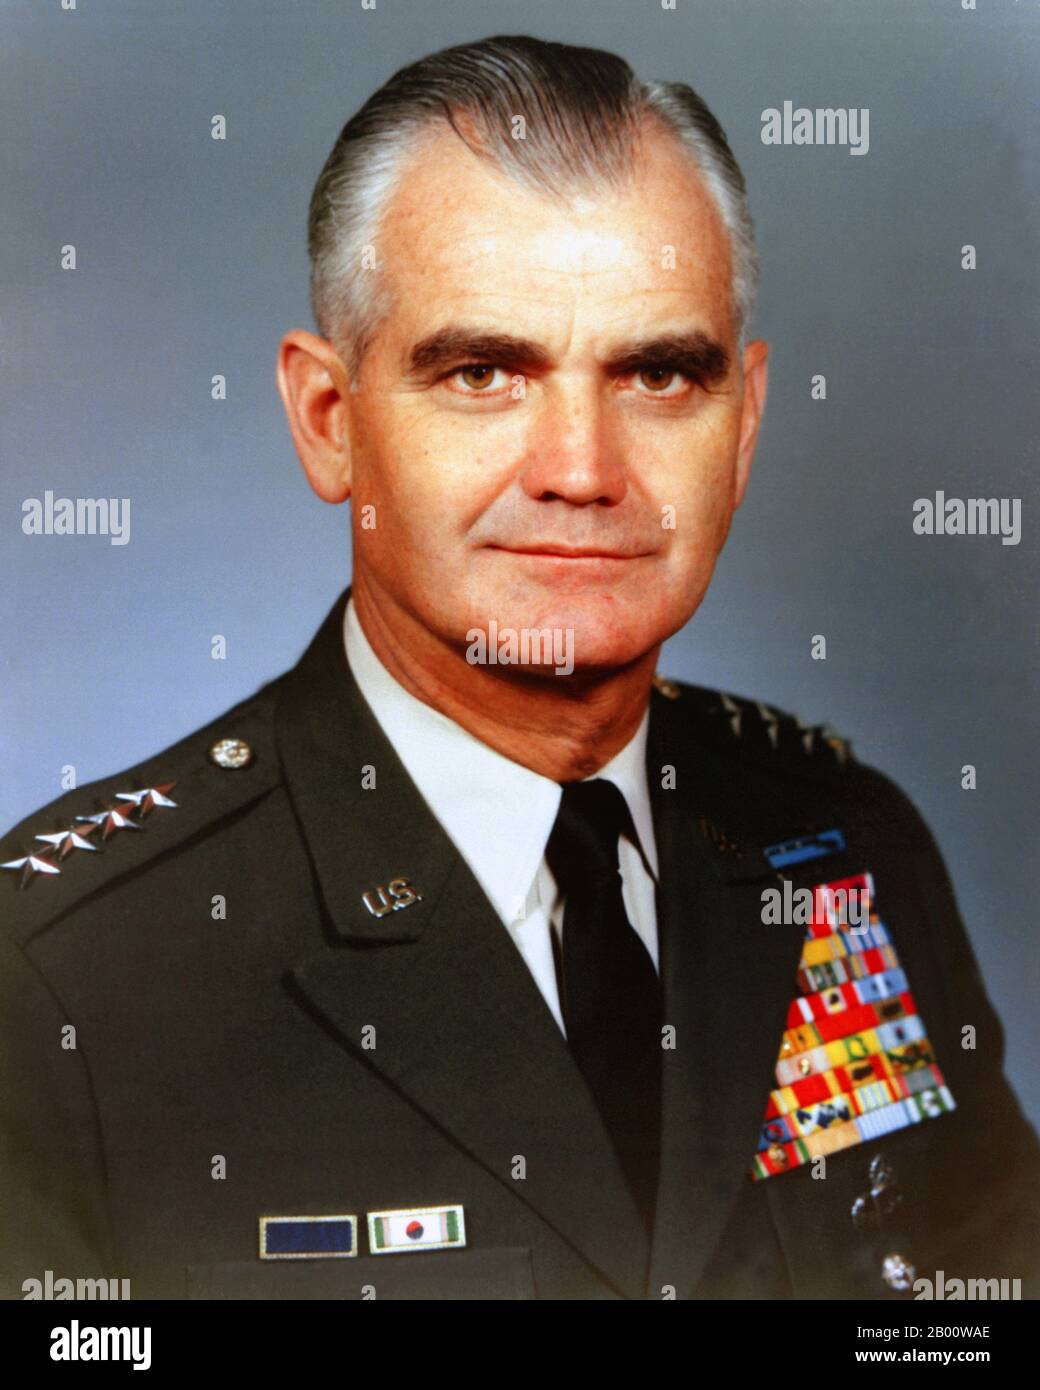 USA/Vietnam: General William Westmoreland, Chief of Staff of the U.S. Army and head of the Military Assistance Command, Vietnam (MACV).  Official portrait of Army Chief of Staff General William C. Westmoreland (1914-2005). William Childs Westmoreland (March 26, 1914 – July 18, 2005) was an American General who commanded American military operations in the Vietnam War at its peak from 1964 to 1968, with the Tet Offensive. He adopted a strategy of attrition against the National Liberation Front of South Vietnam and the North Vietnamese Army. Stock Photo